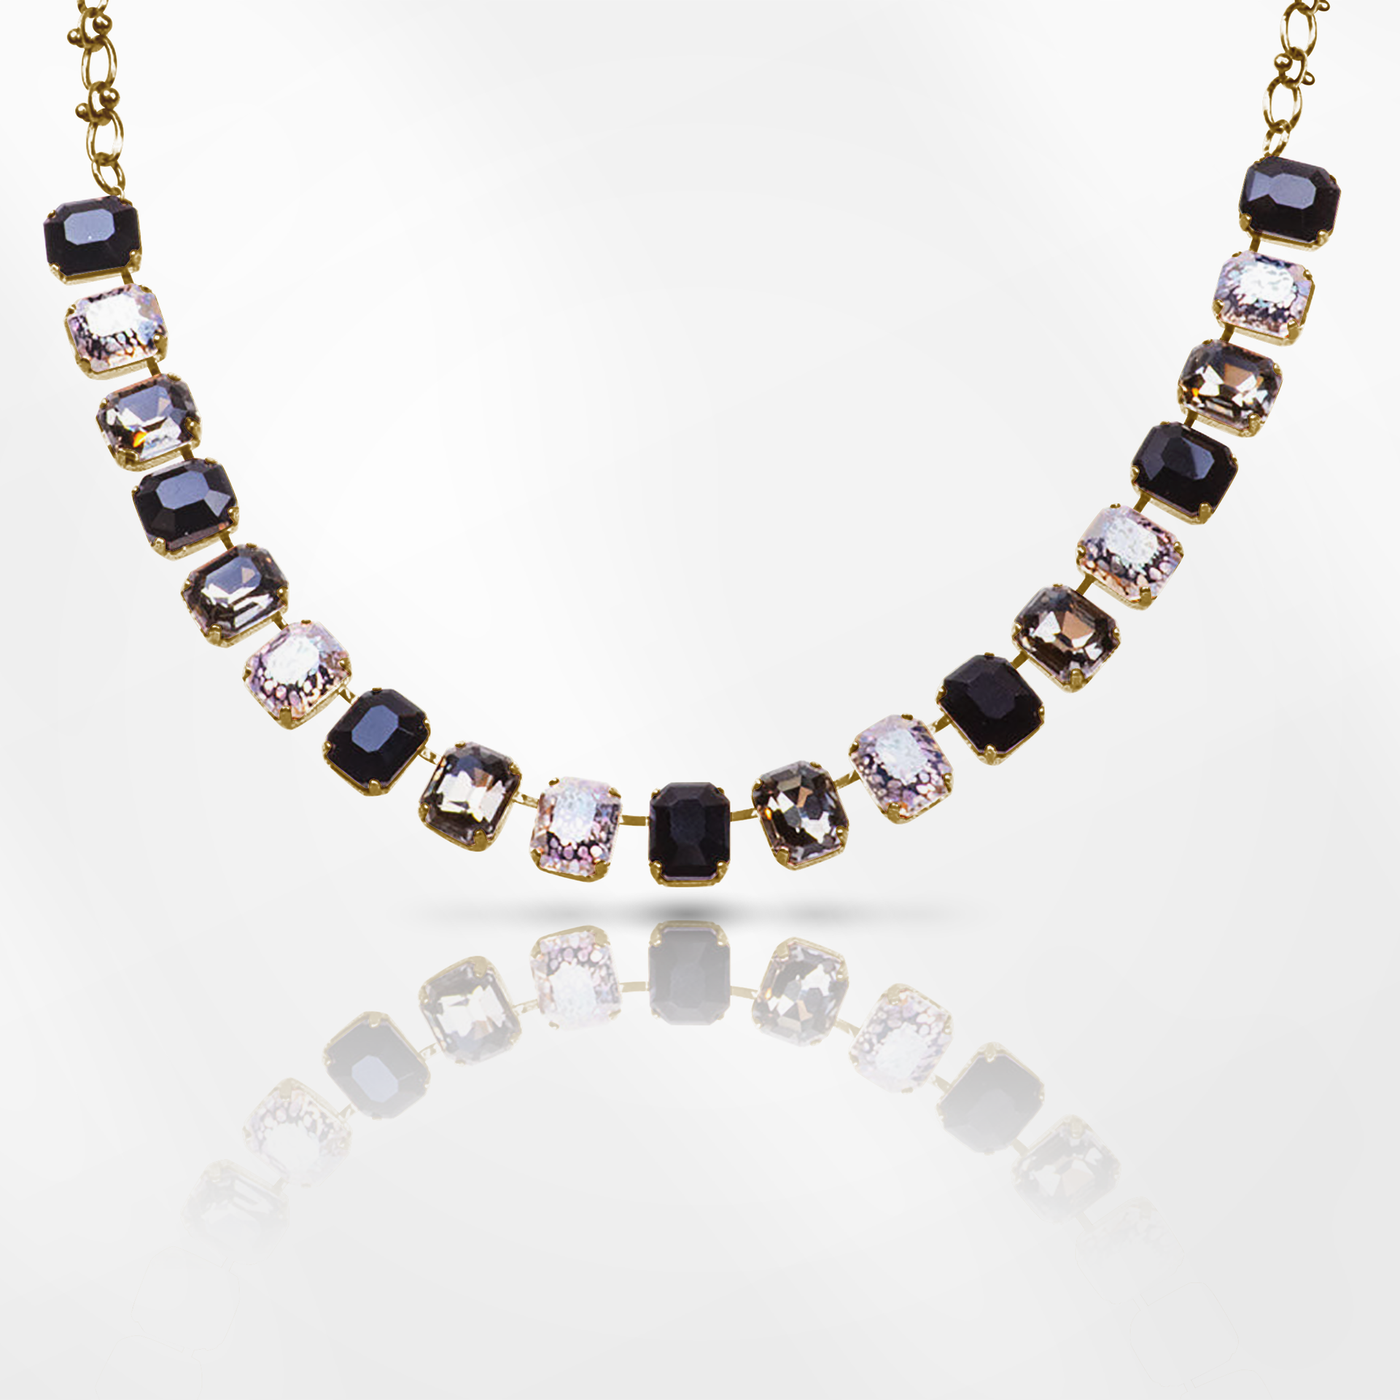 Emerald Cut Necklace in "Rocky Road"